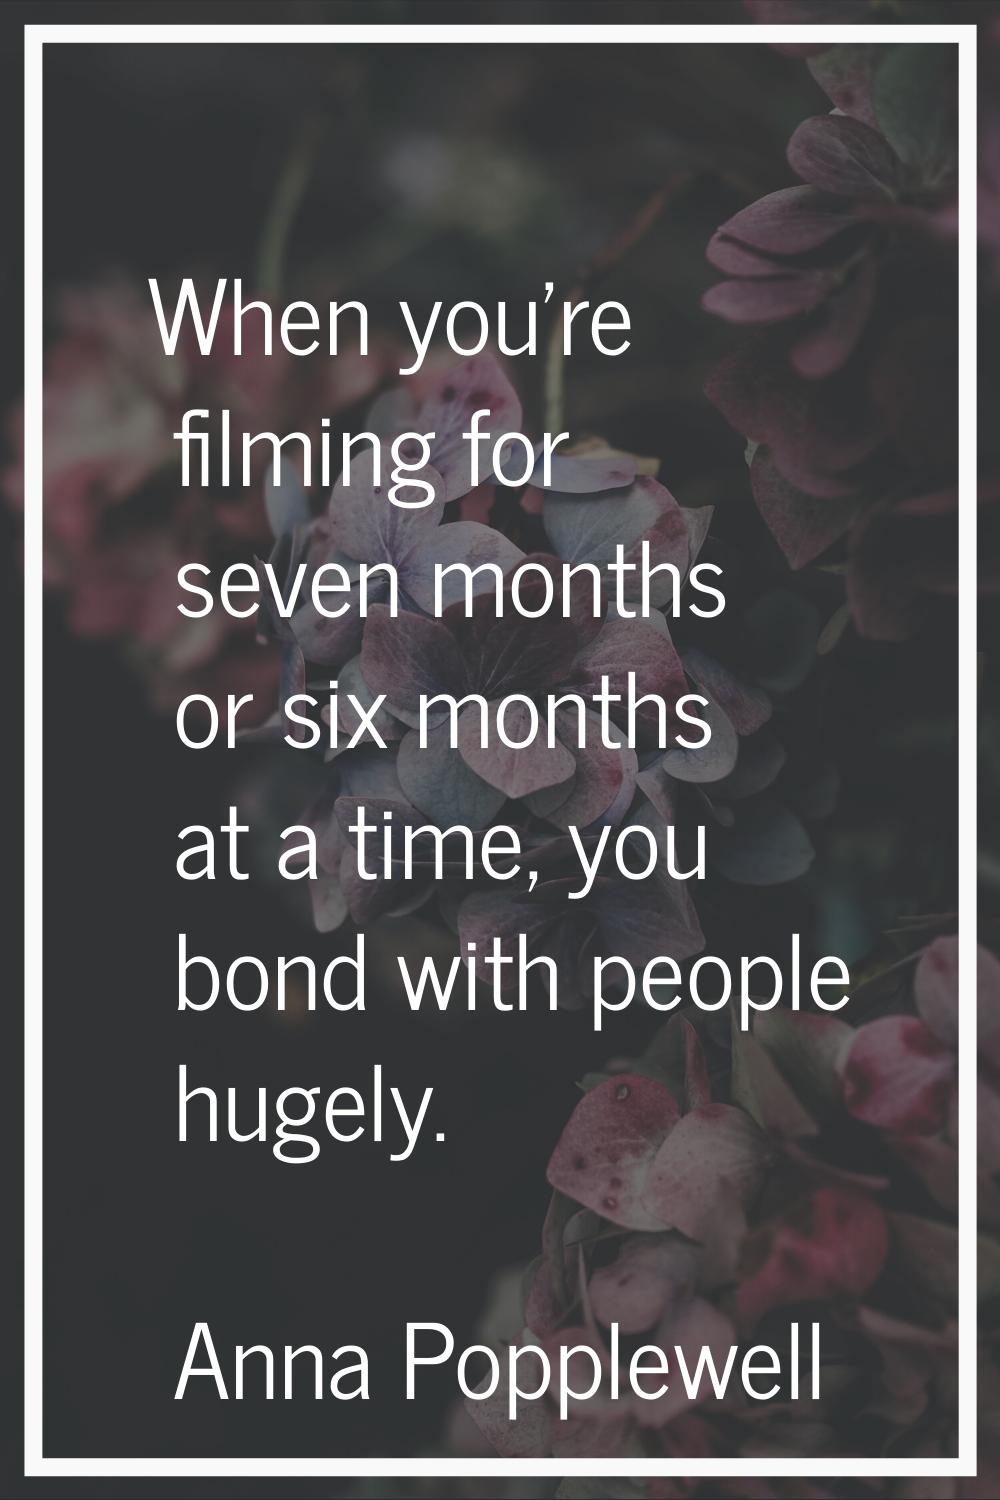 When you're filming for seven months or six months at a time, you bond with people hugely.